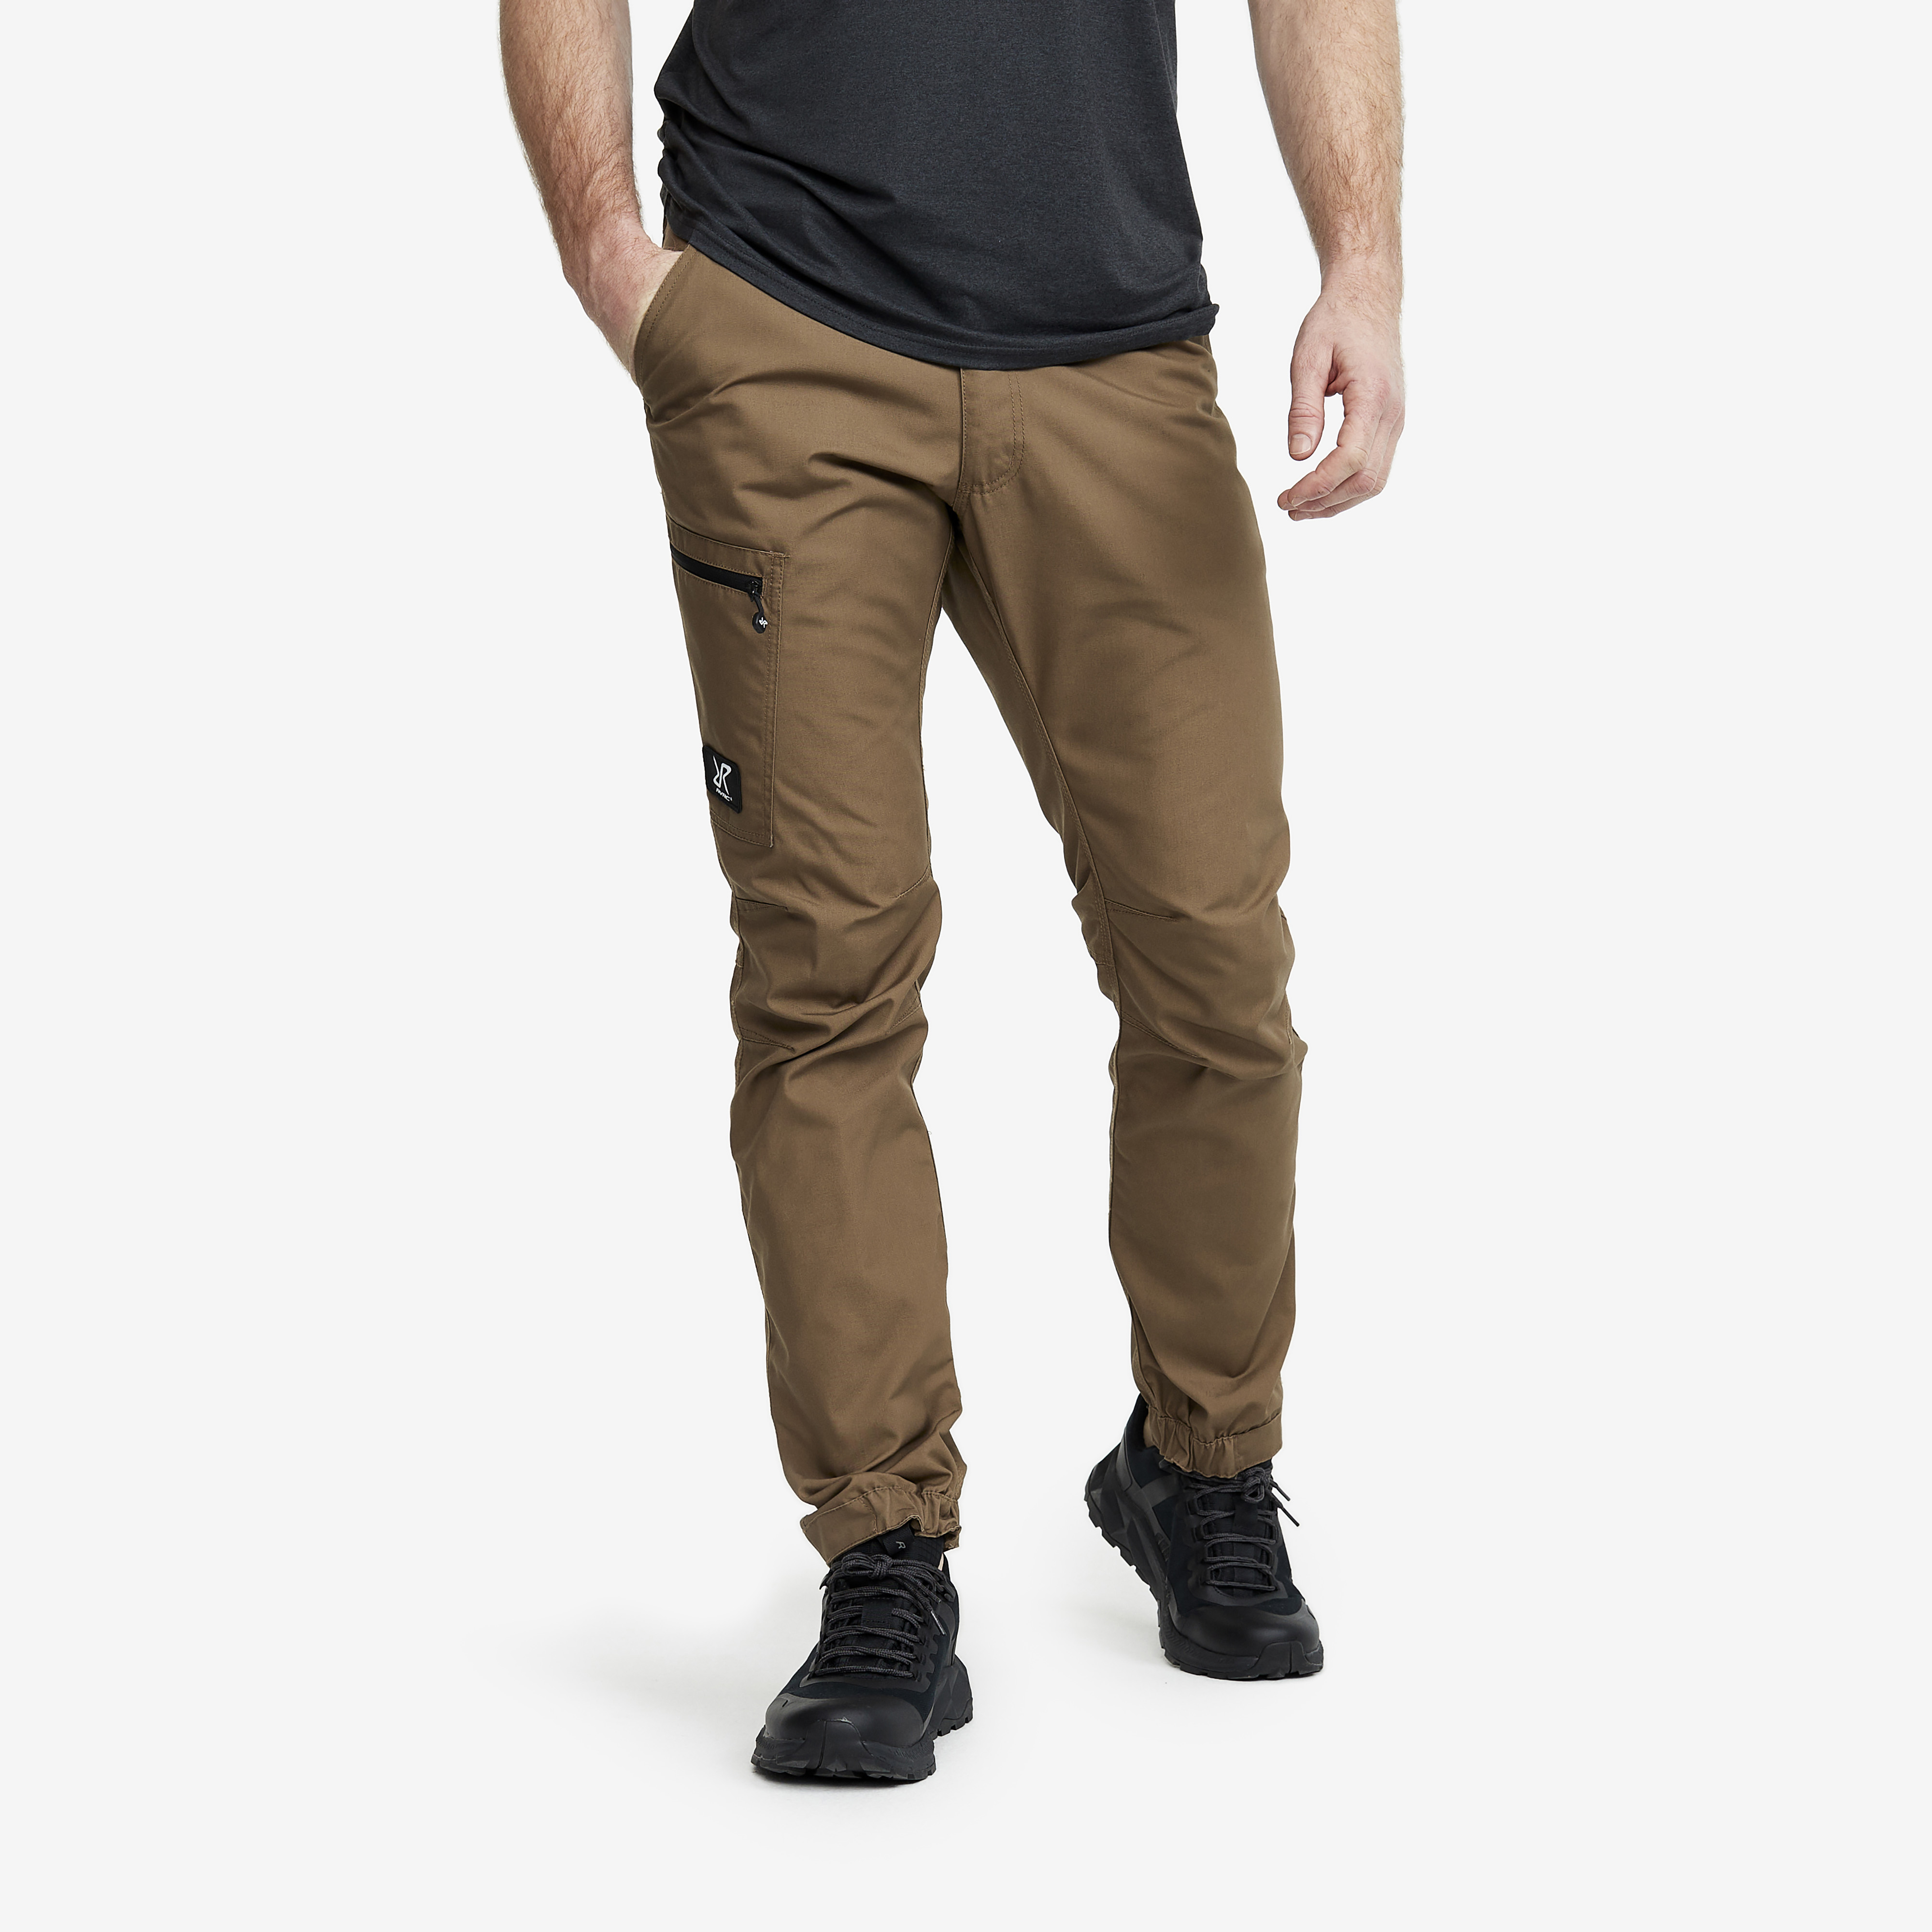 Outdoor Basic Pants Cub Homme